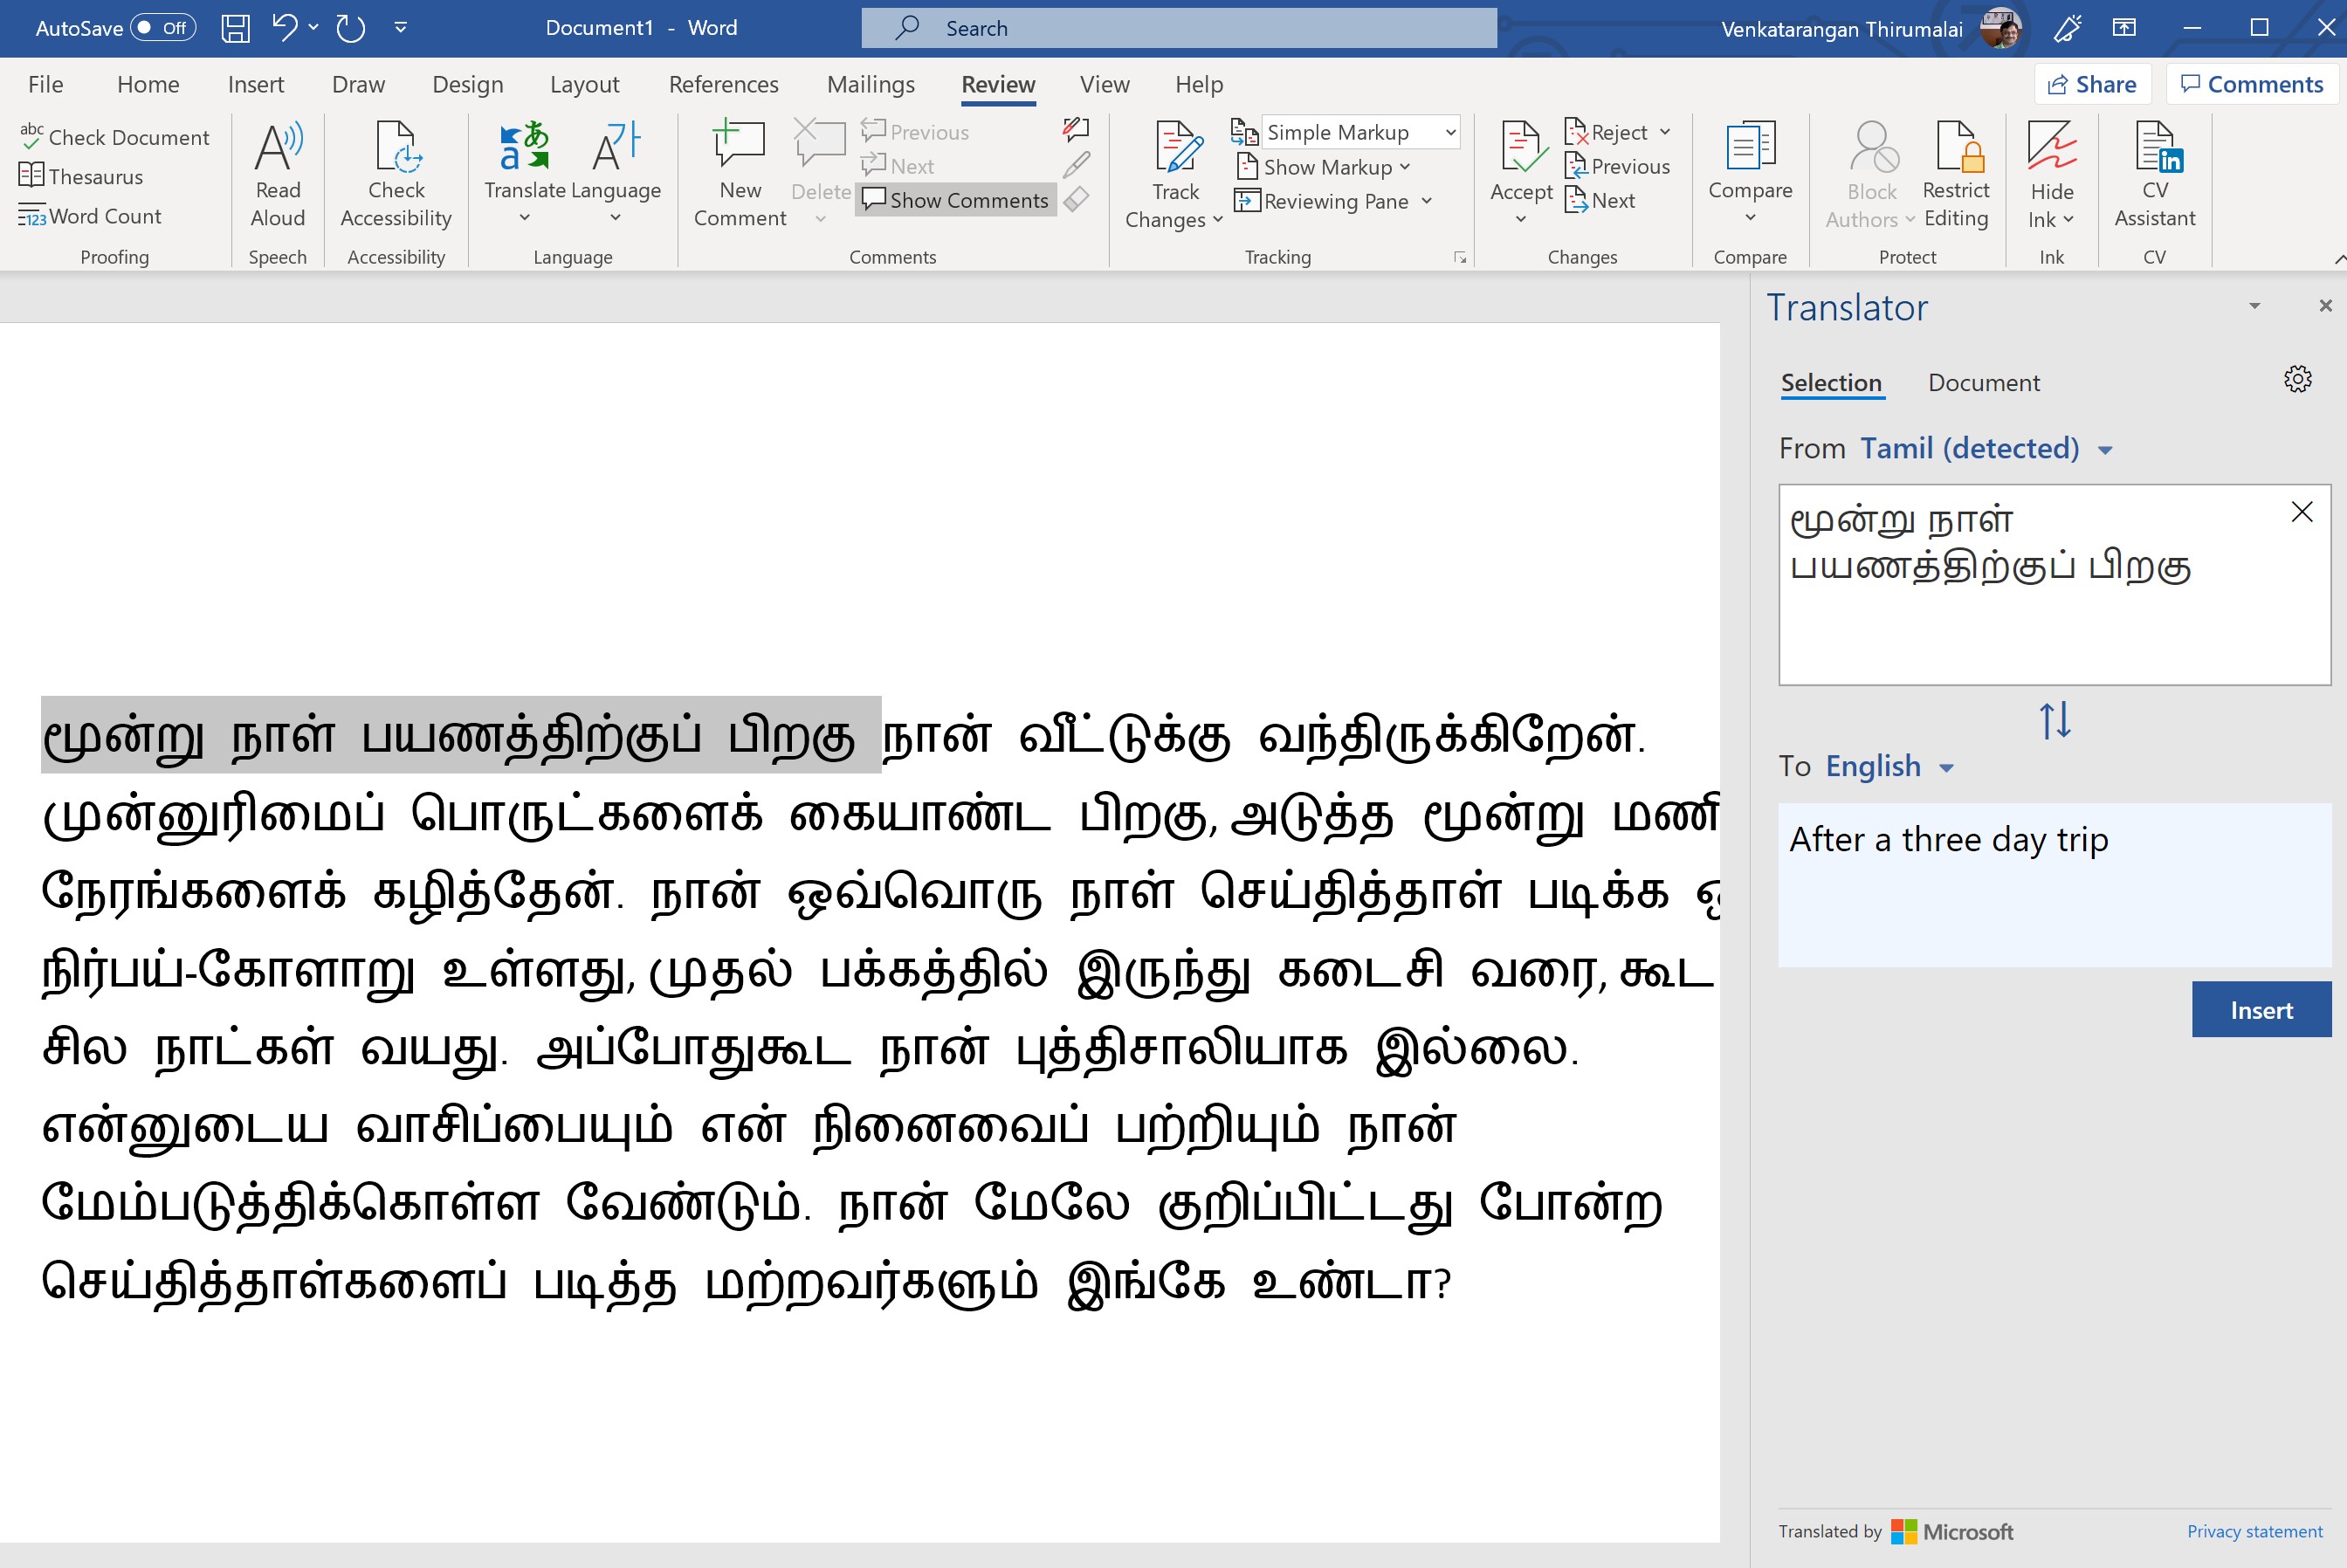 You can translate sentences or the whole document in Microsoft Word from Tamil to English (or) vice-versa